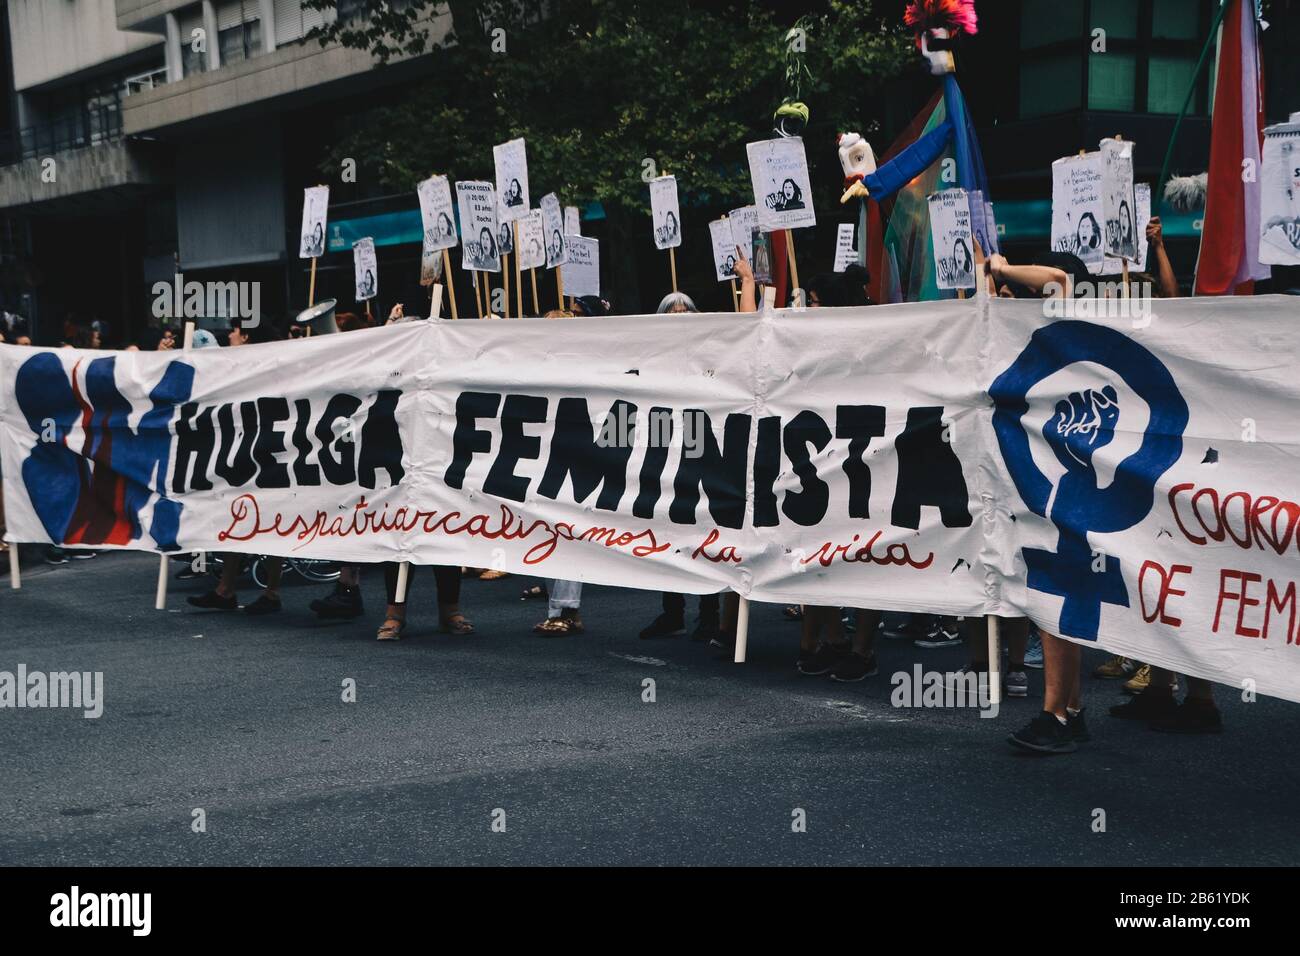 Poster in the 8M protest that says "Feminist Strike" Stock Photo